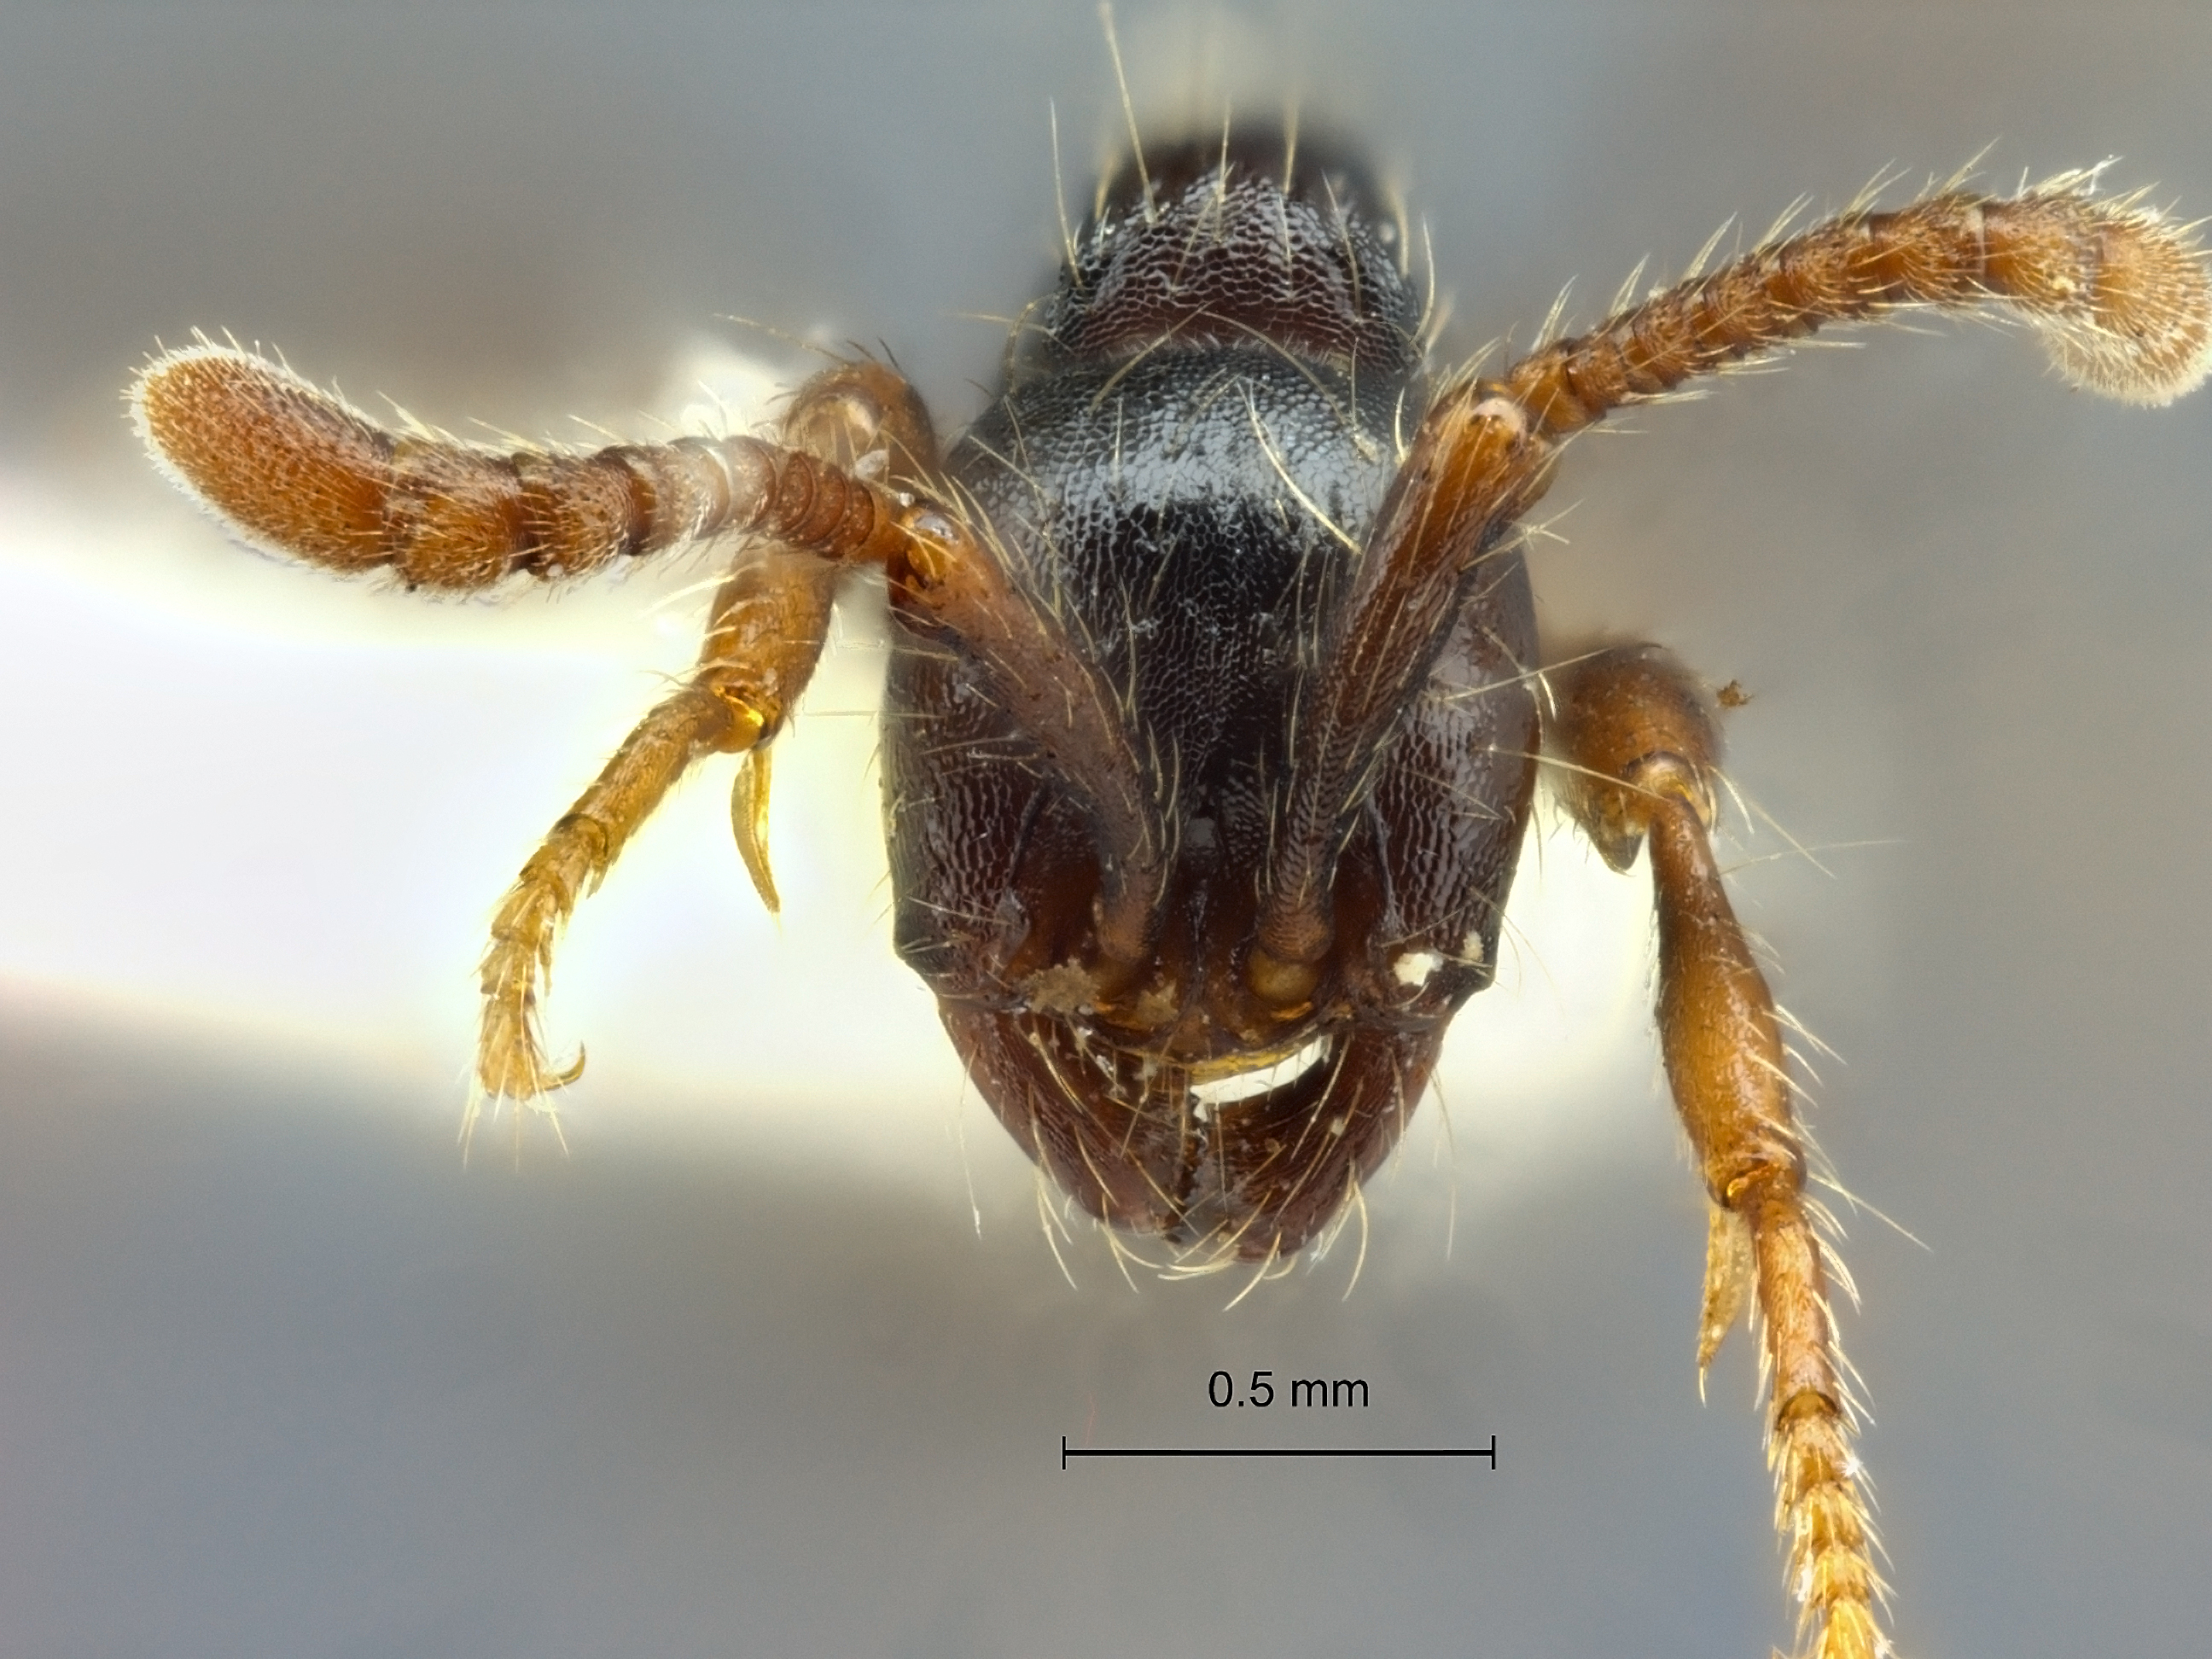 Aenictus sulawesiensis frontal